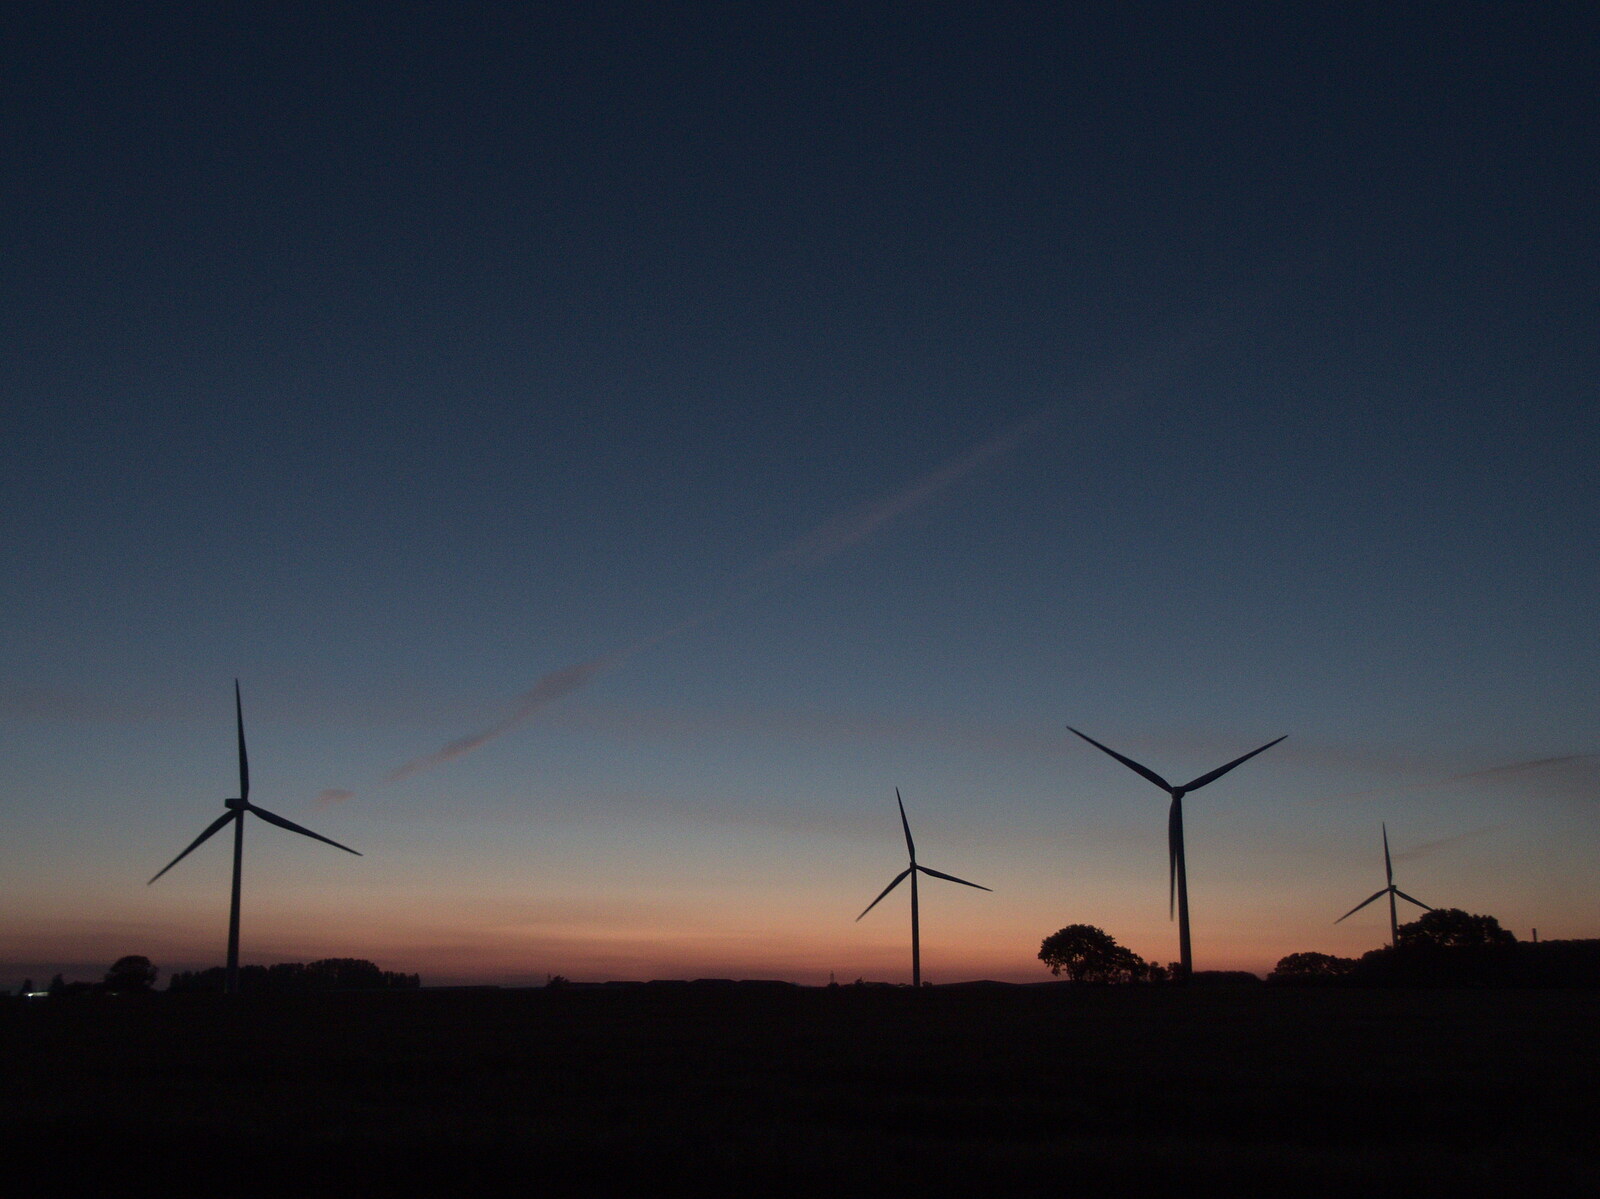 The wind turbines on Eye airfield from Hares, Tortoises and Station 119, Eye, Suffolk - 19th July 2021